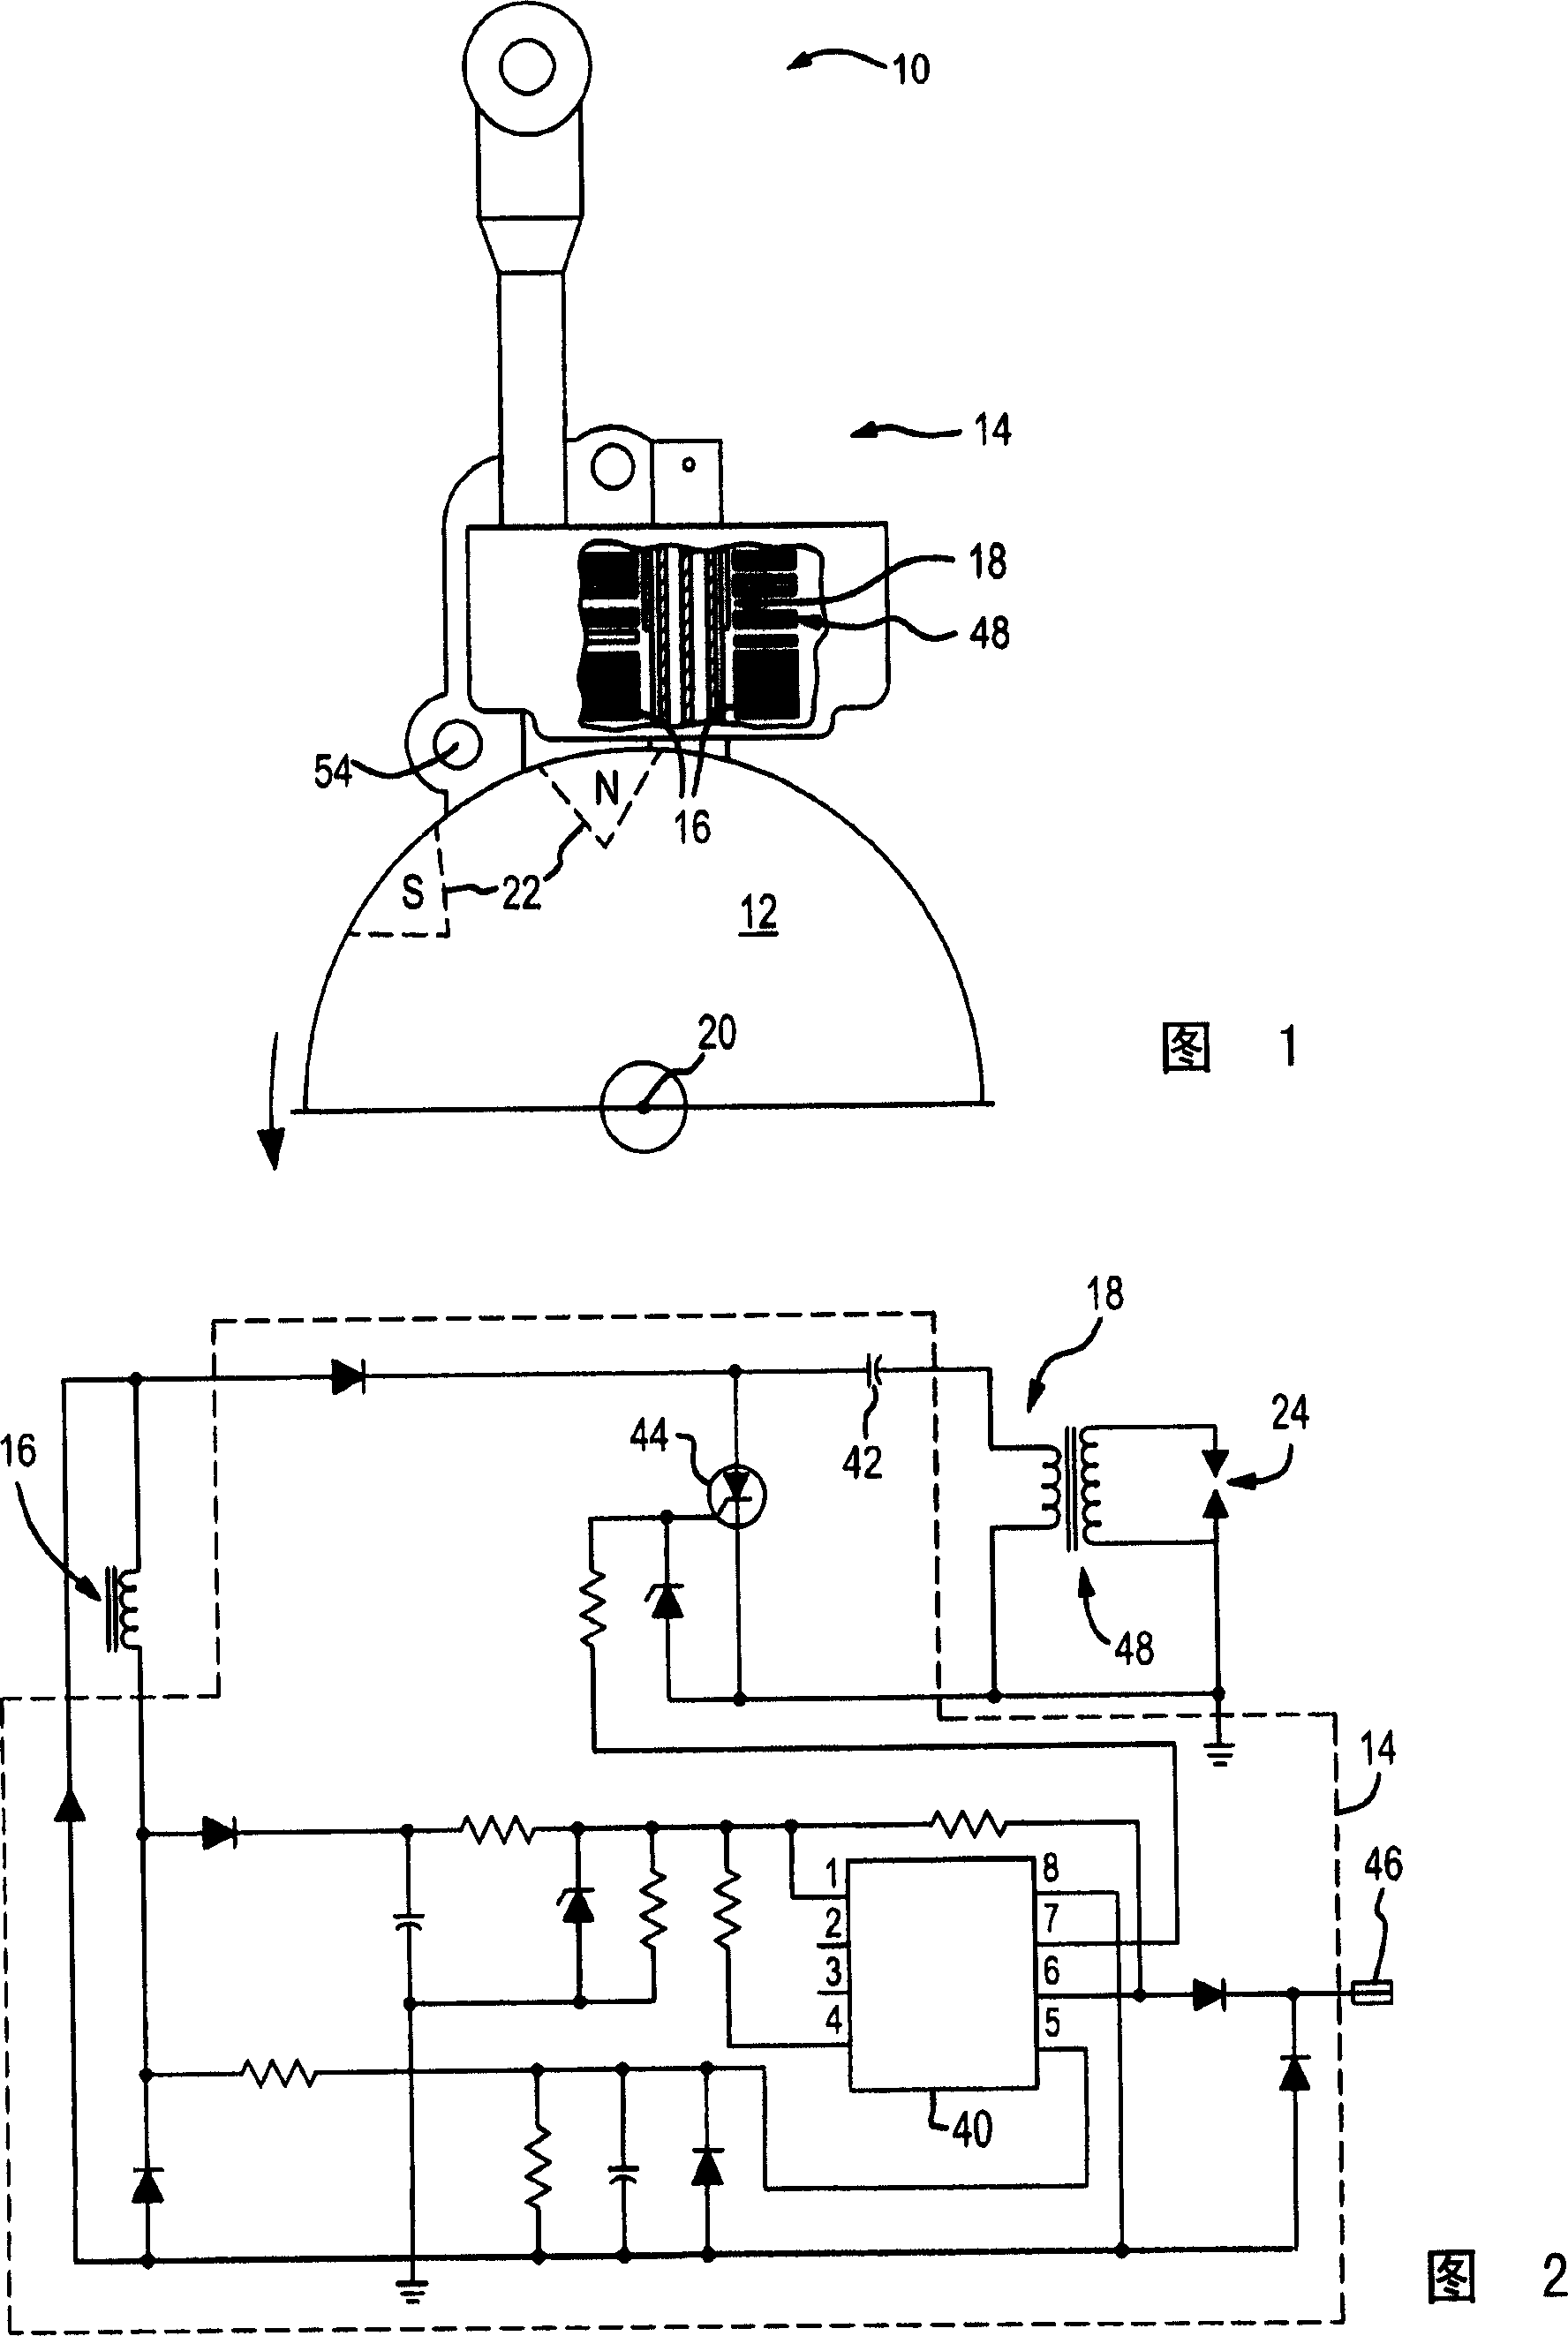 Apparatus and method for limiting excessive engine speeds in a light-duty combustion engine